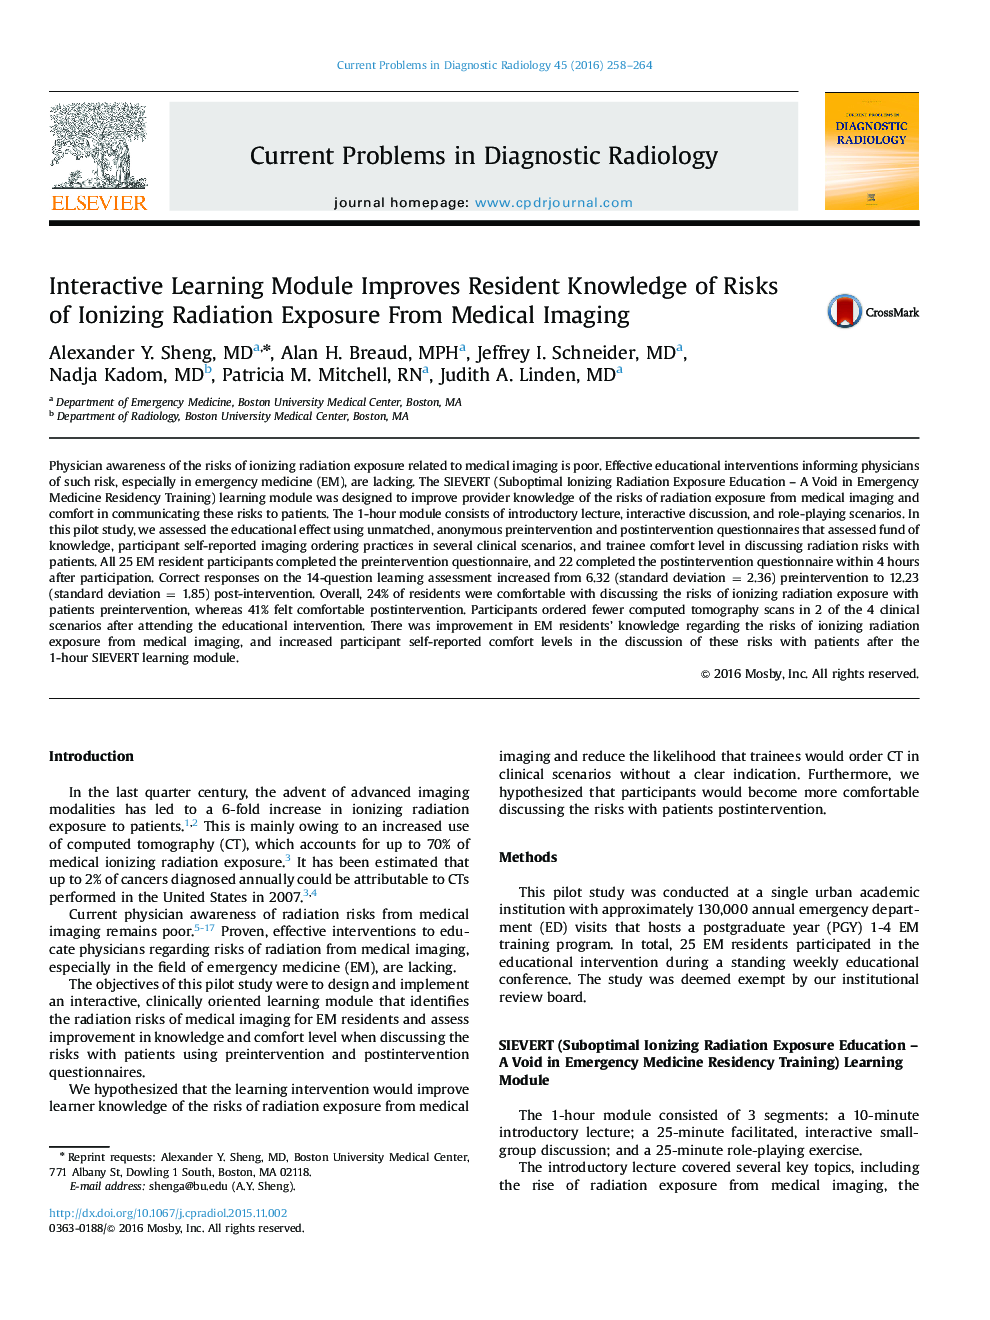 Interactive Learning Module Improves Resident Knowledge of Risks of Ionizing Radiation Exposure From Medical Imaging